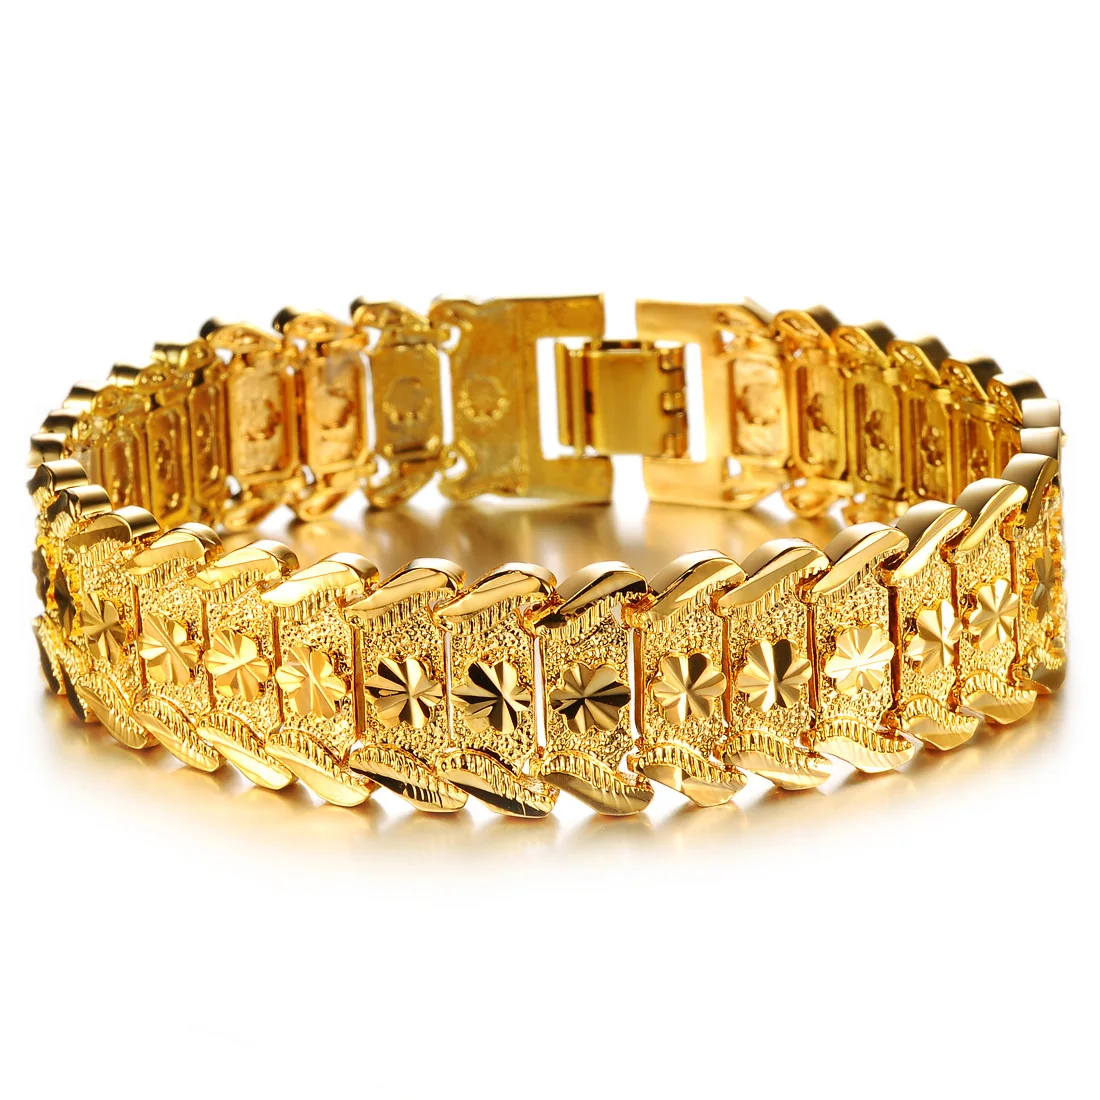 SOHI Women Gold Toned Gold Plated Cuff Bracelet Buy SOHI Women Gold Toned  Gold Plated Cuff Bracelet Online at Best Price in India  Nykaa